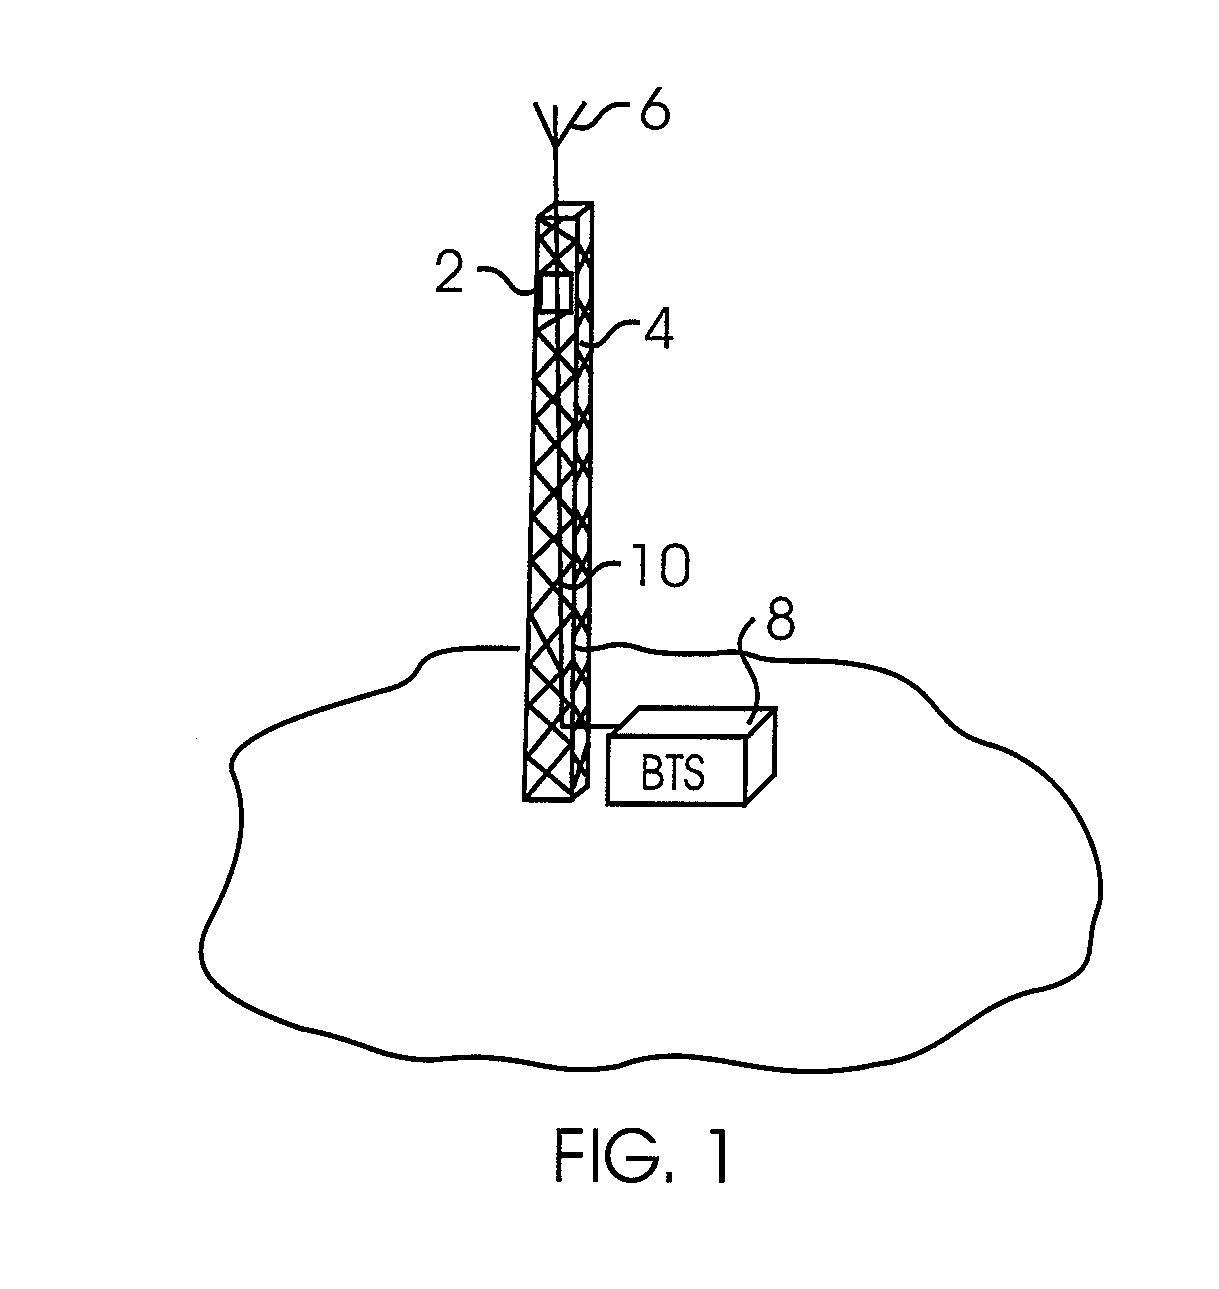 Low noise figure radiofrequency device